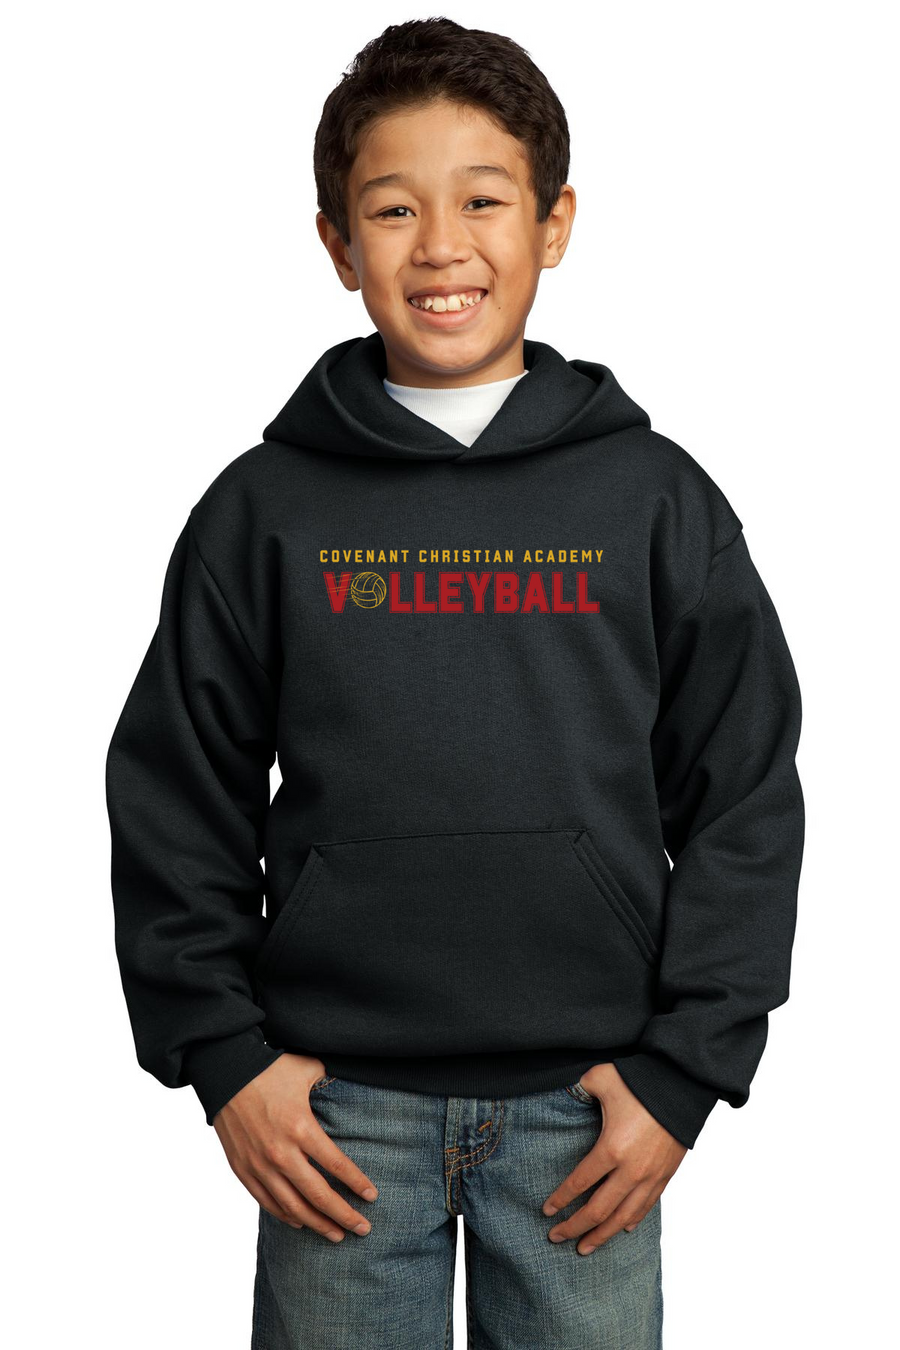 Covenant Christian Academy Spirit Wear 2023-24 On-Demand-Youth Unisex Port & Company Hoodie Volleyball